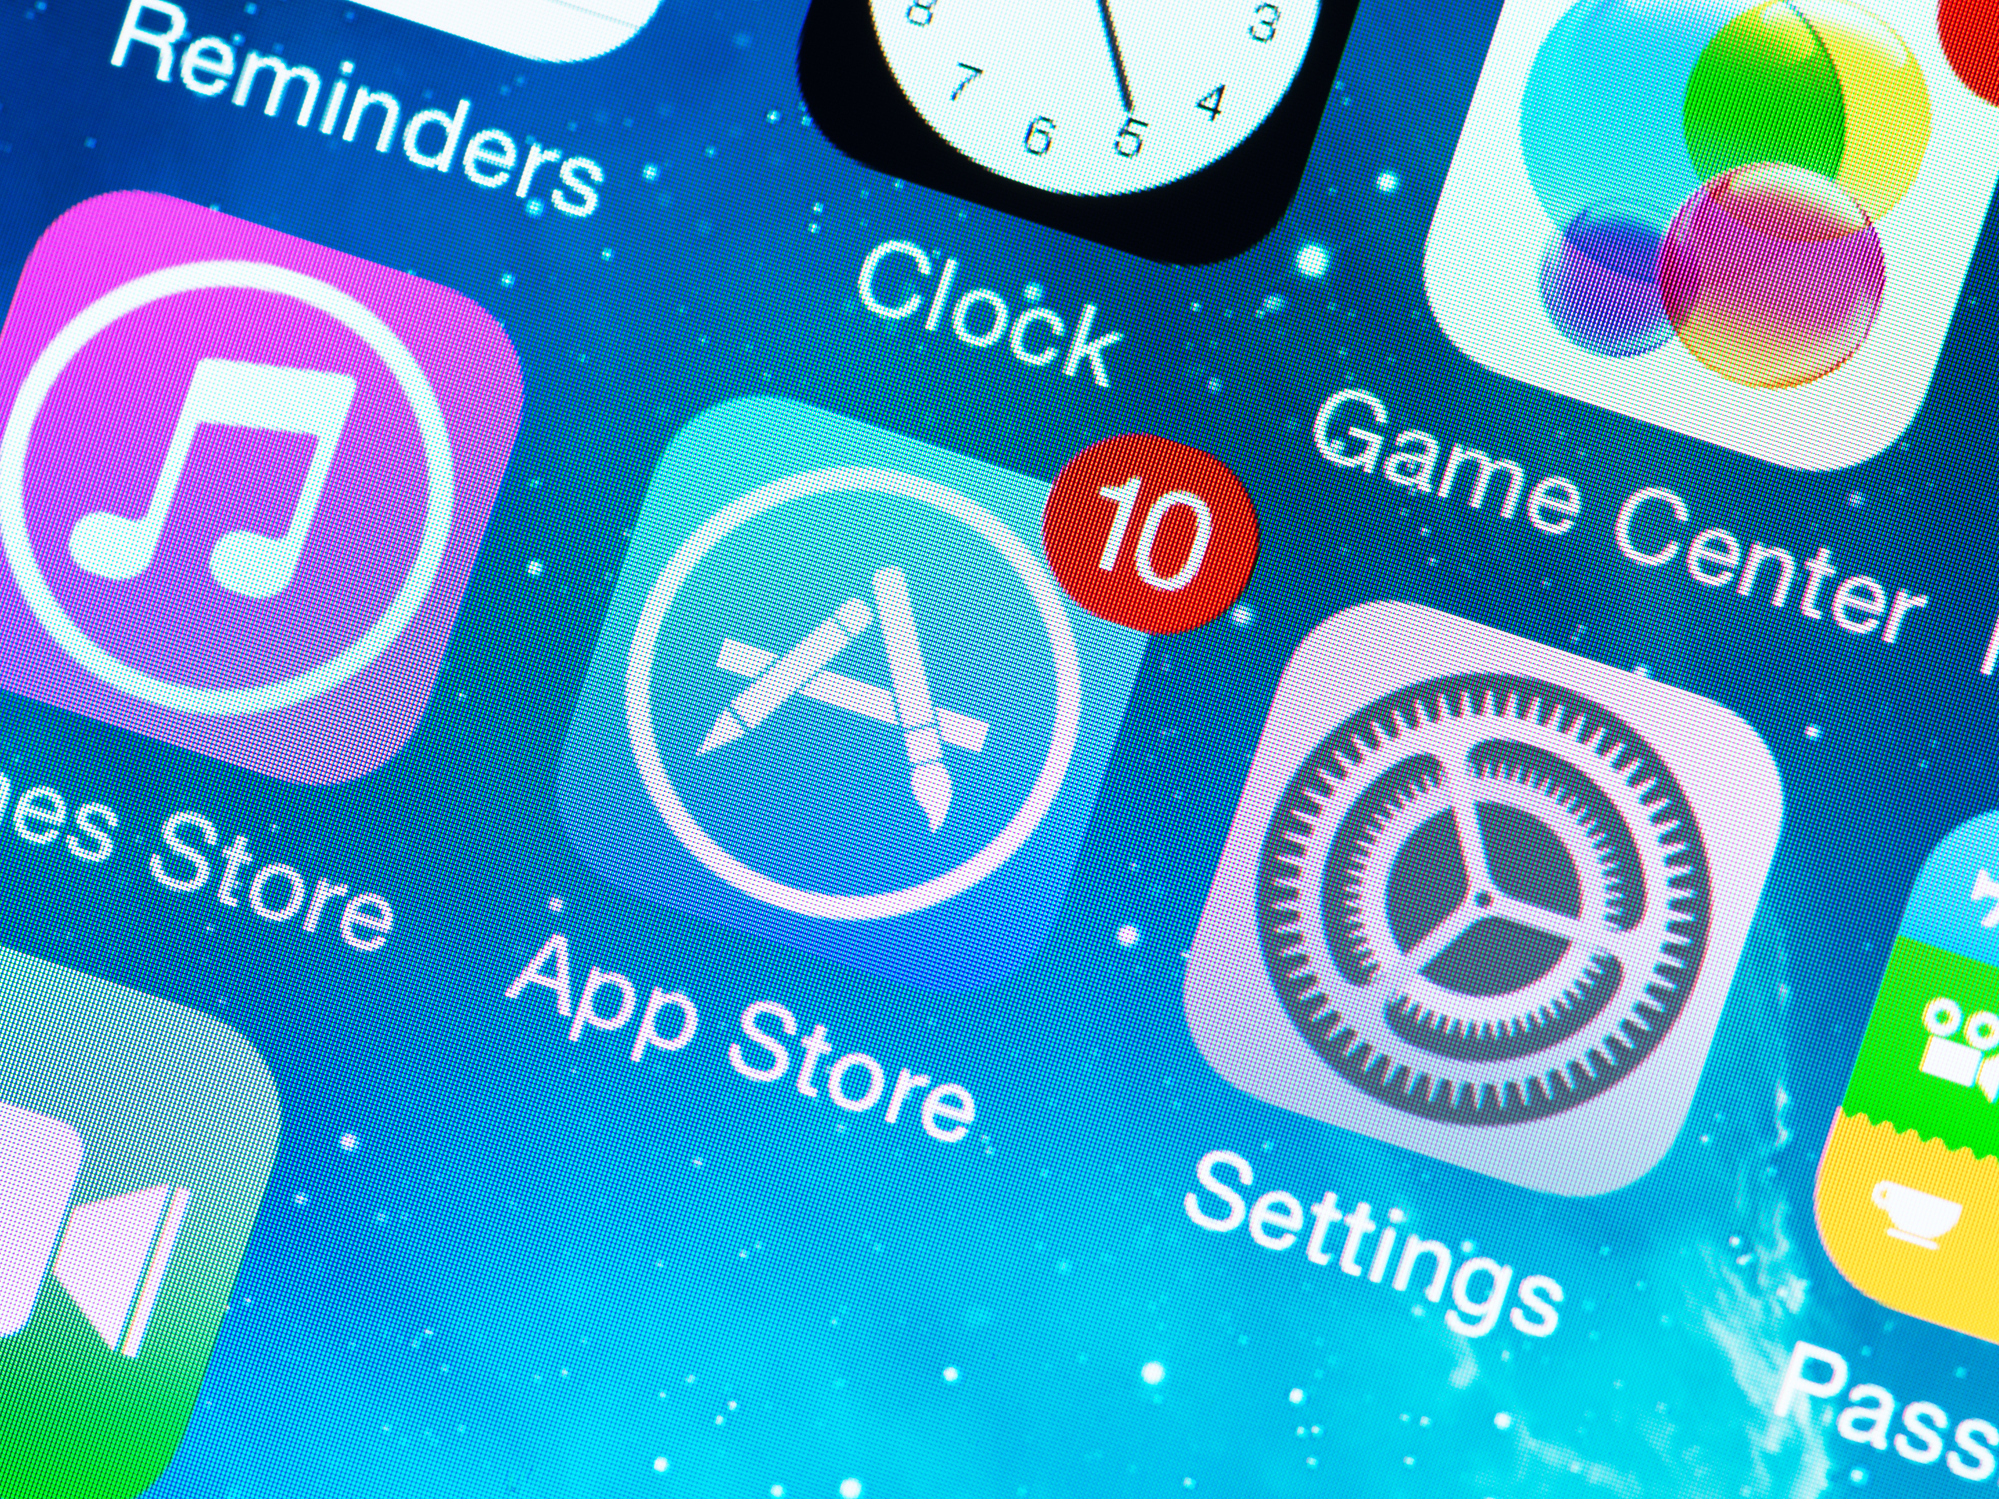 A close up photo of a phone home screen, centered on the app store 